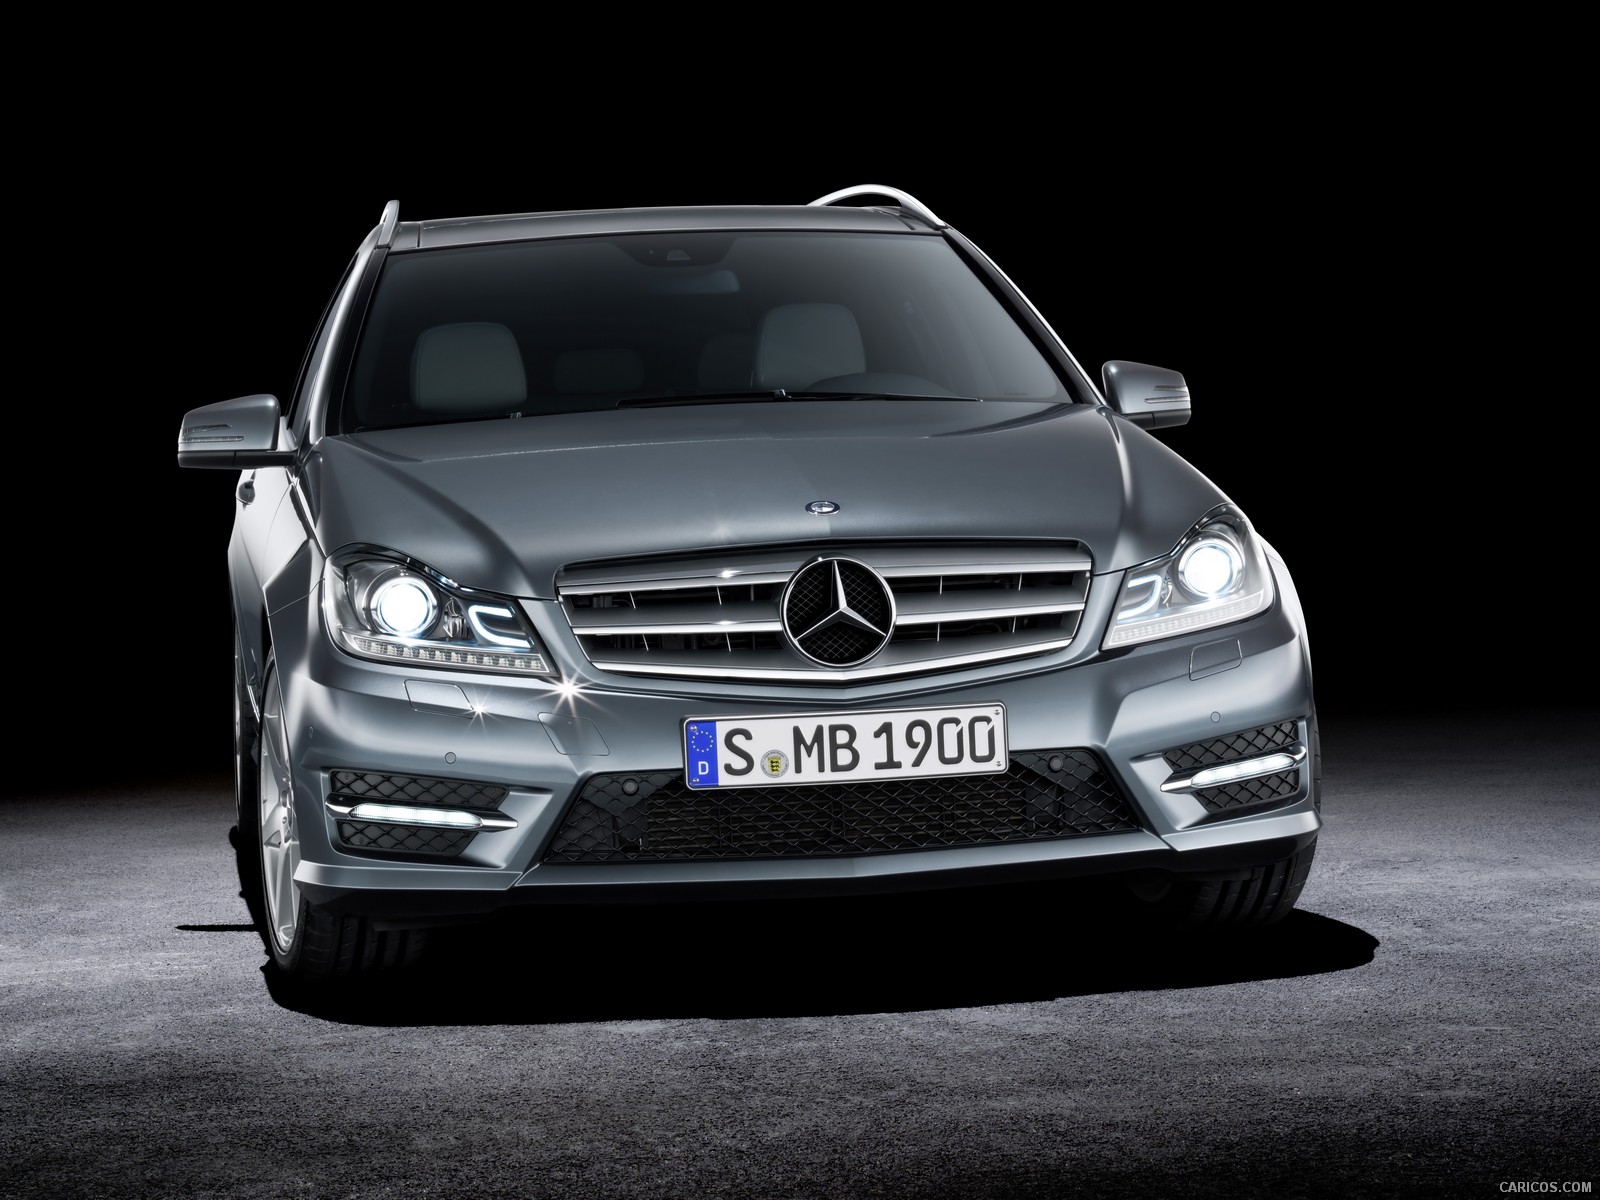 Mercedes-Benz C-Class Estate (2012)  - Front Angle , #33 of 36